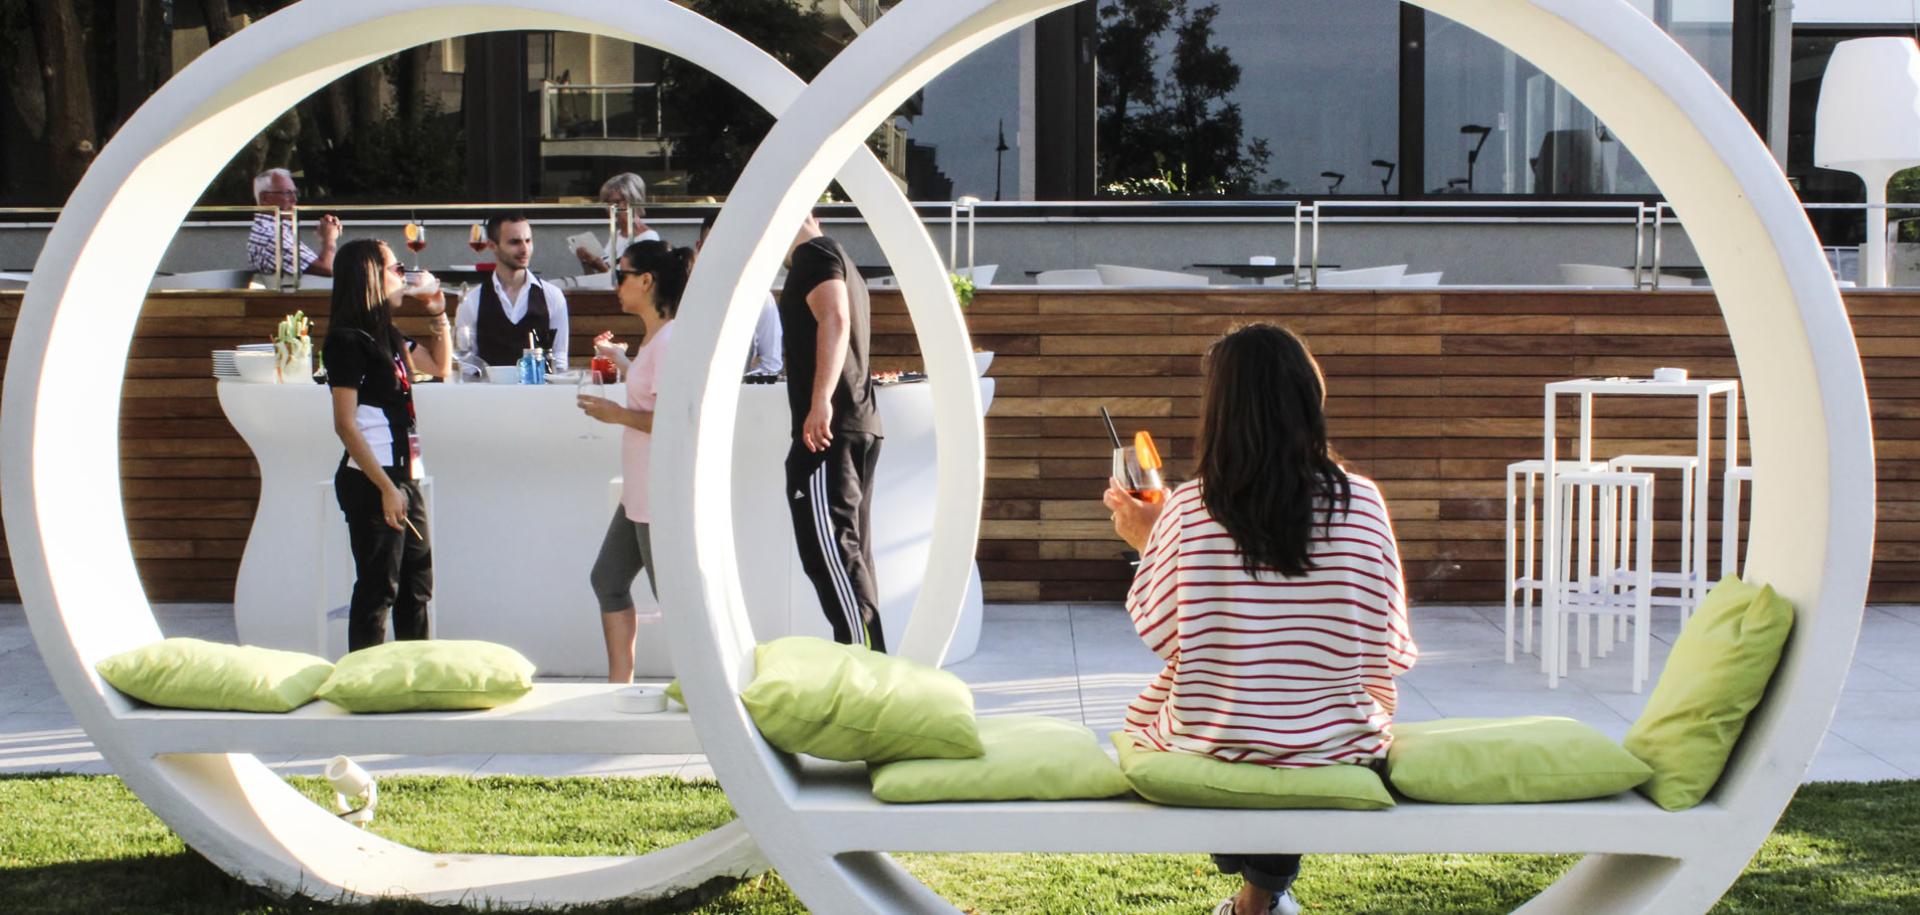 People socializing outdoors with drinks, sitting on modern circular chairs.